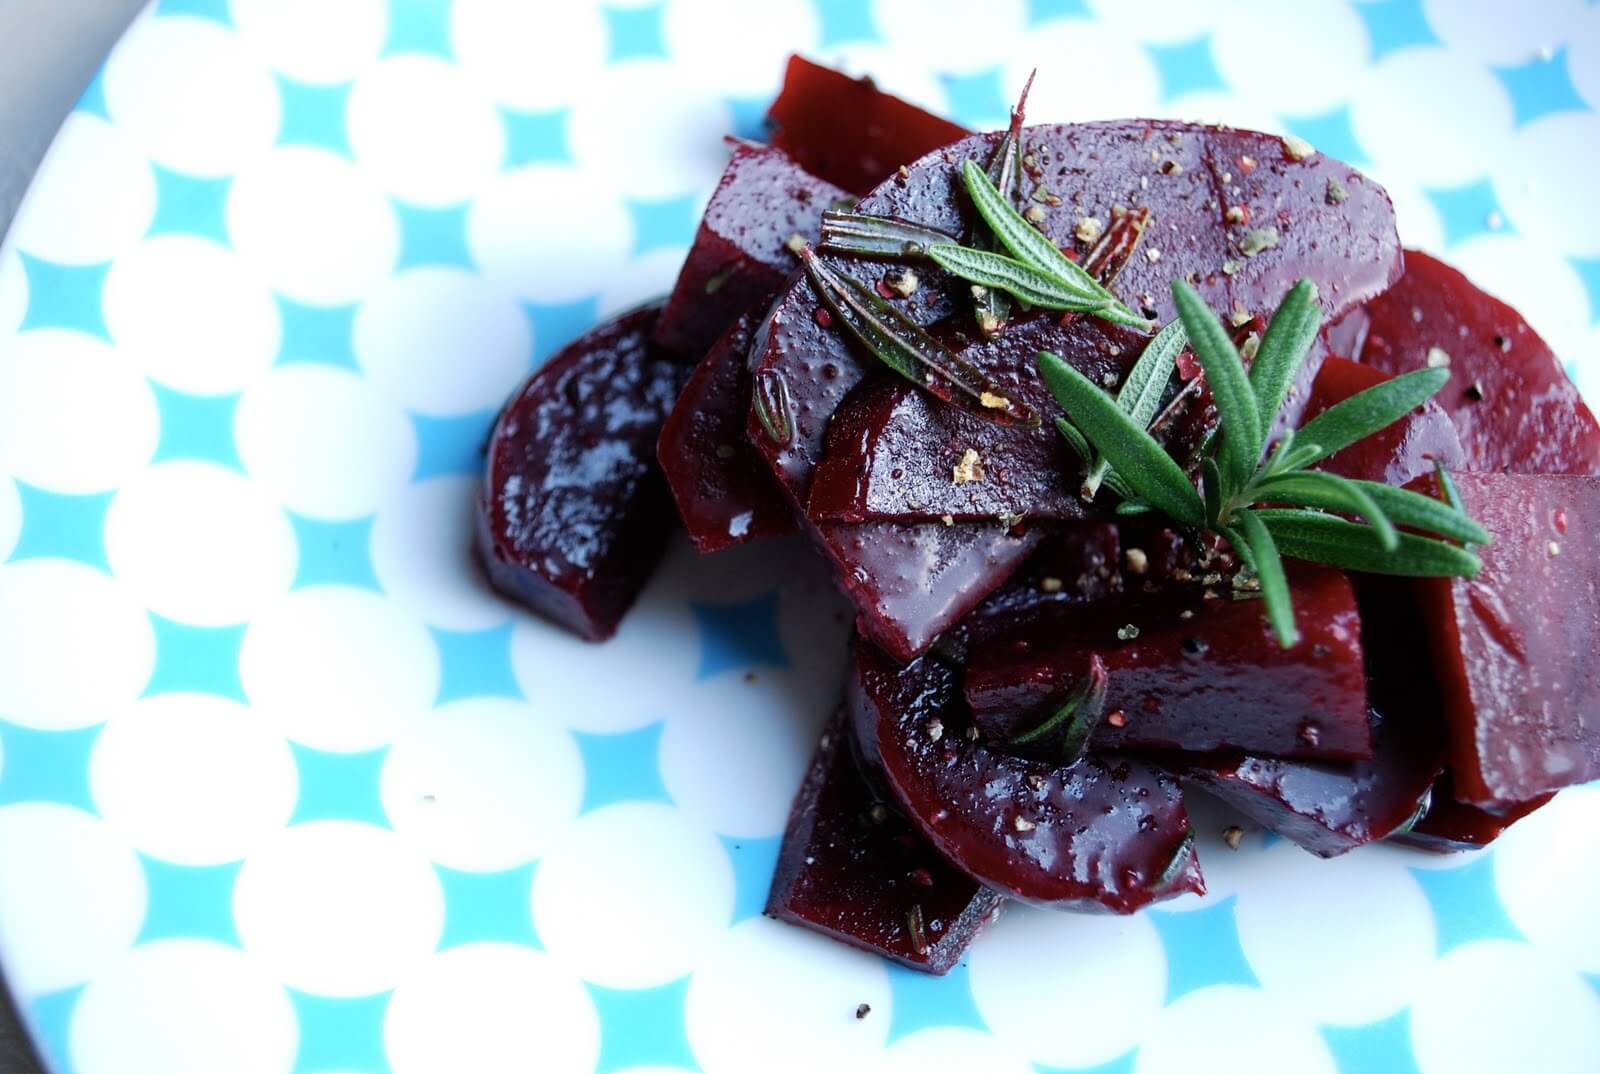 These marinated beets showcase summer beet flavor at its peak. Sea salt, apple cider vinegar, and a hint of rosemary heighten the earthy flavors of beets without overwhelming them.